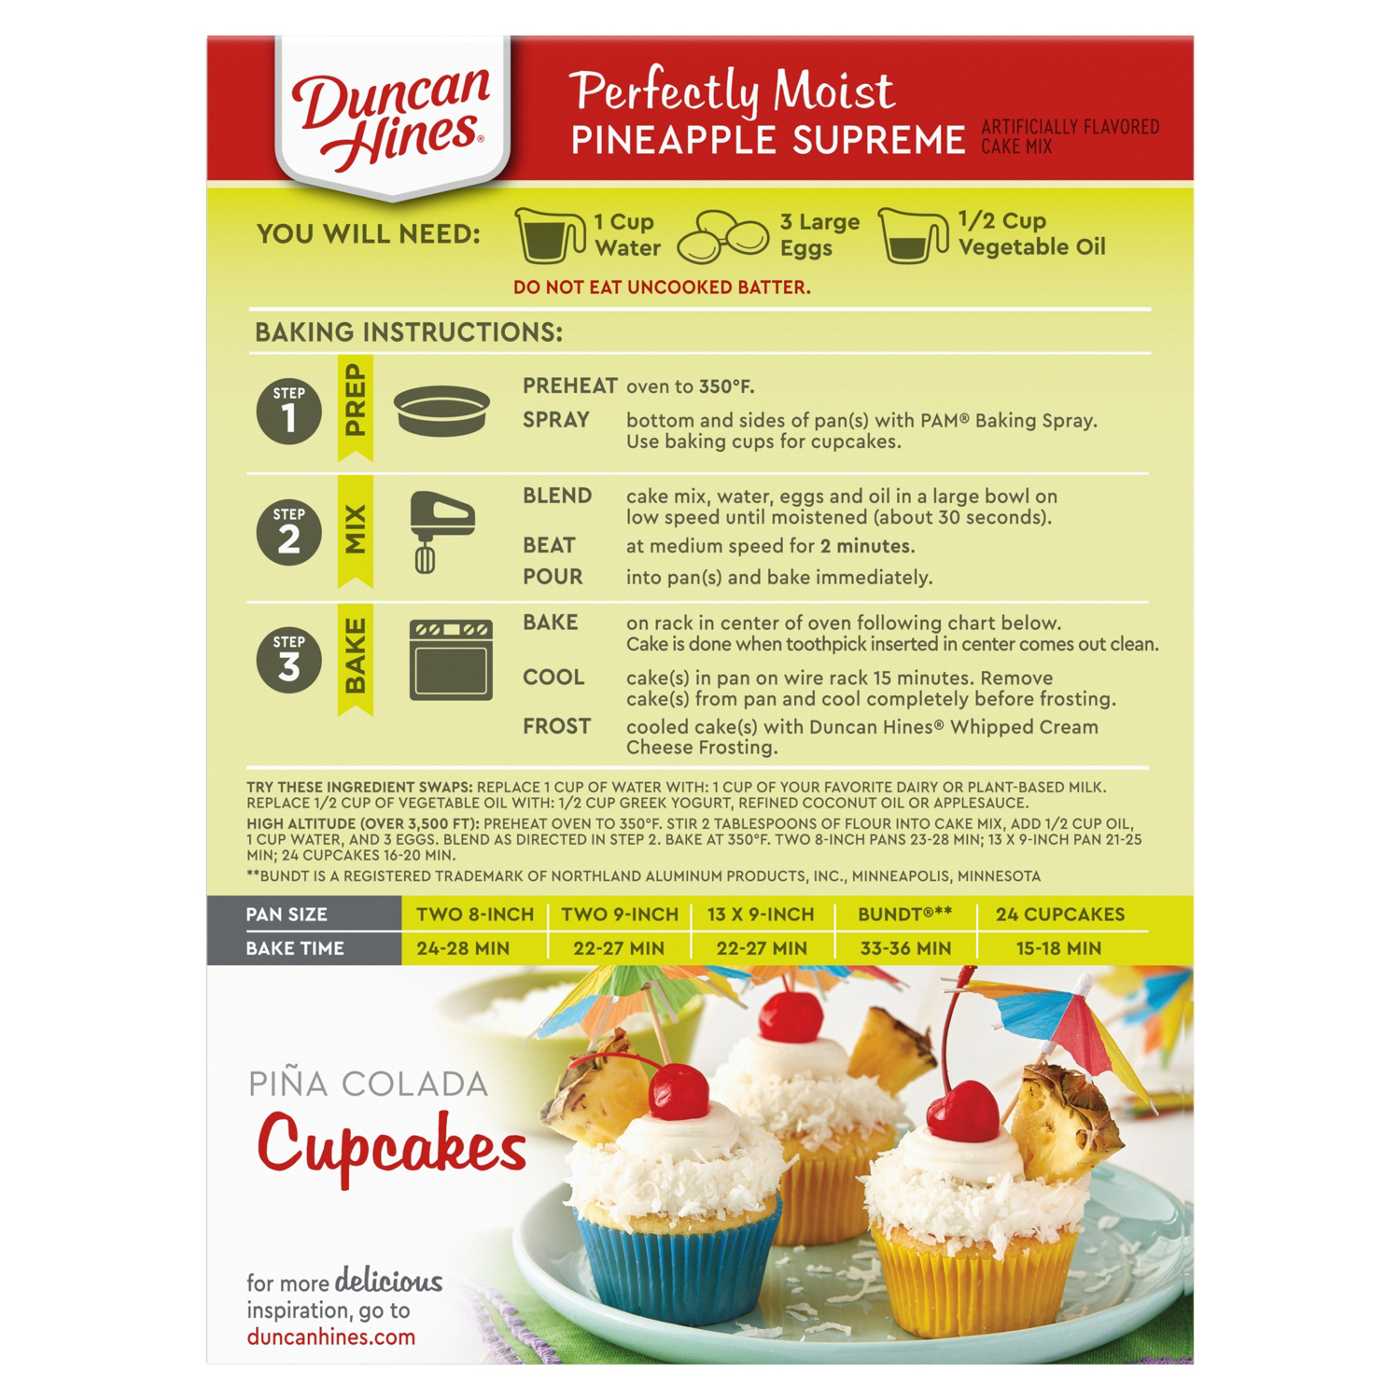 Duncan Hines Signature Perfectly Moist Pineapple Supreme Cake Mix; image 4 of 7